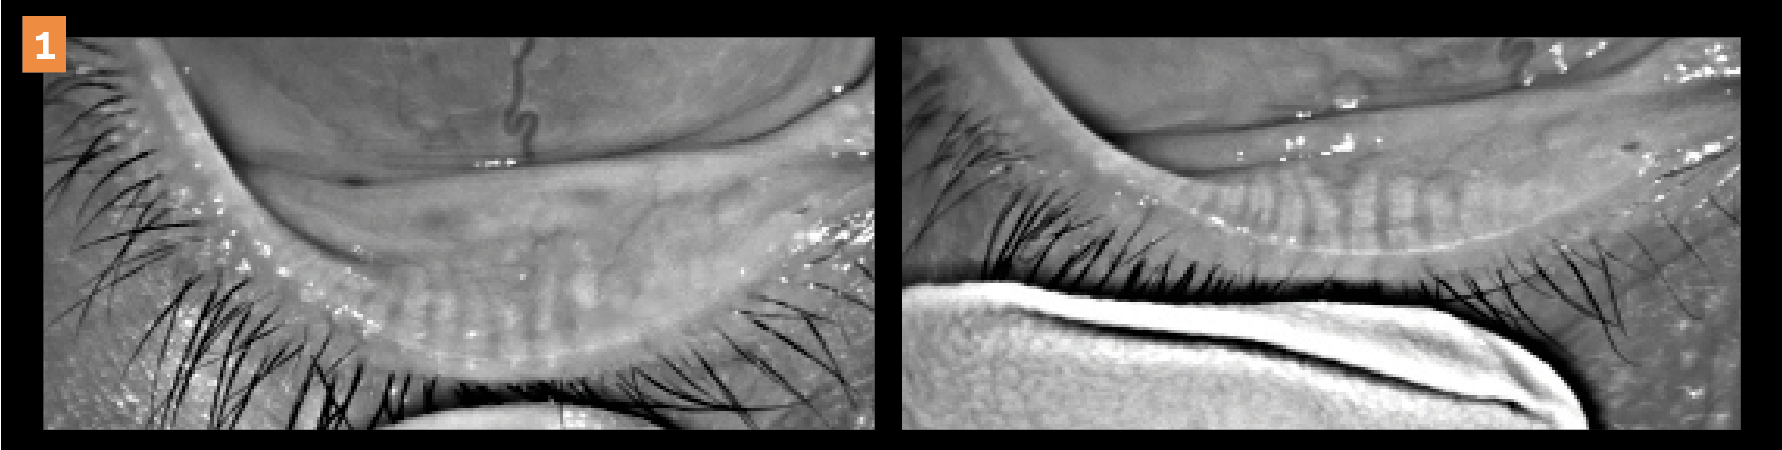 Meibography images show before (left) and after (right) in-office dry eye treatments of a 27-year-old female patient with a recent history of isotretinoin. 